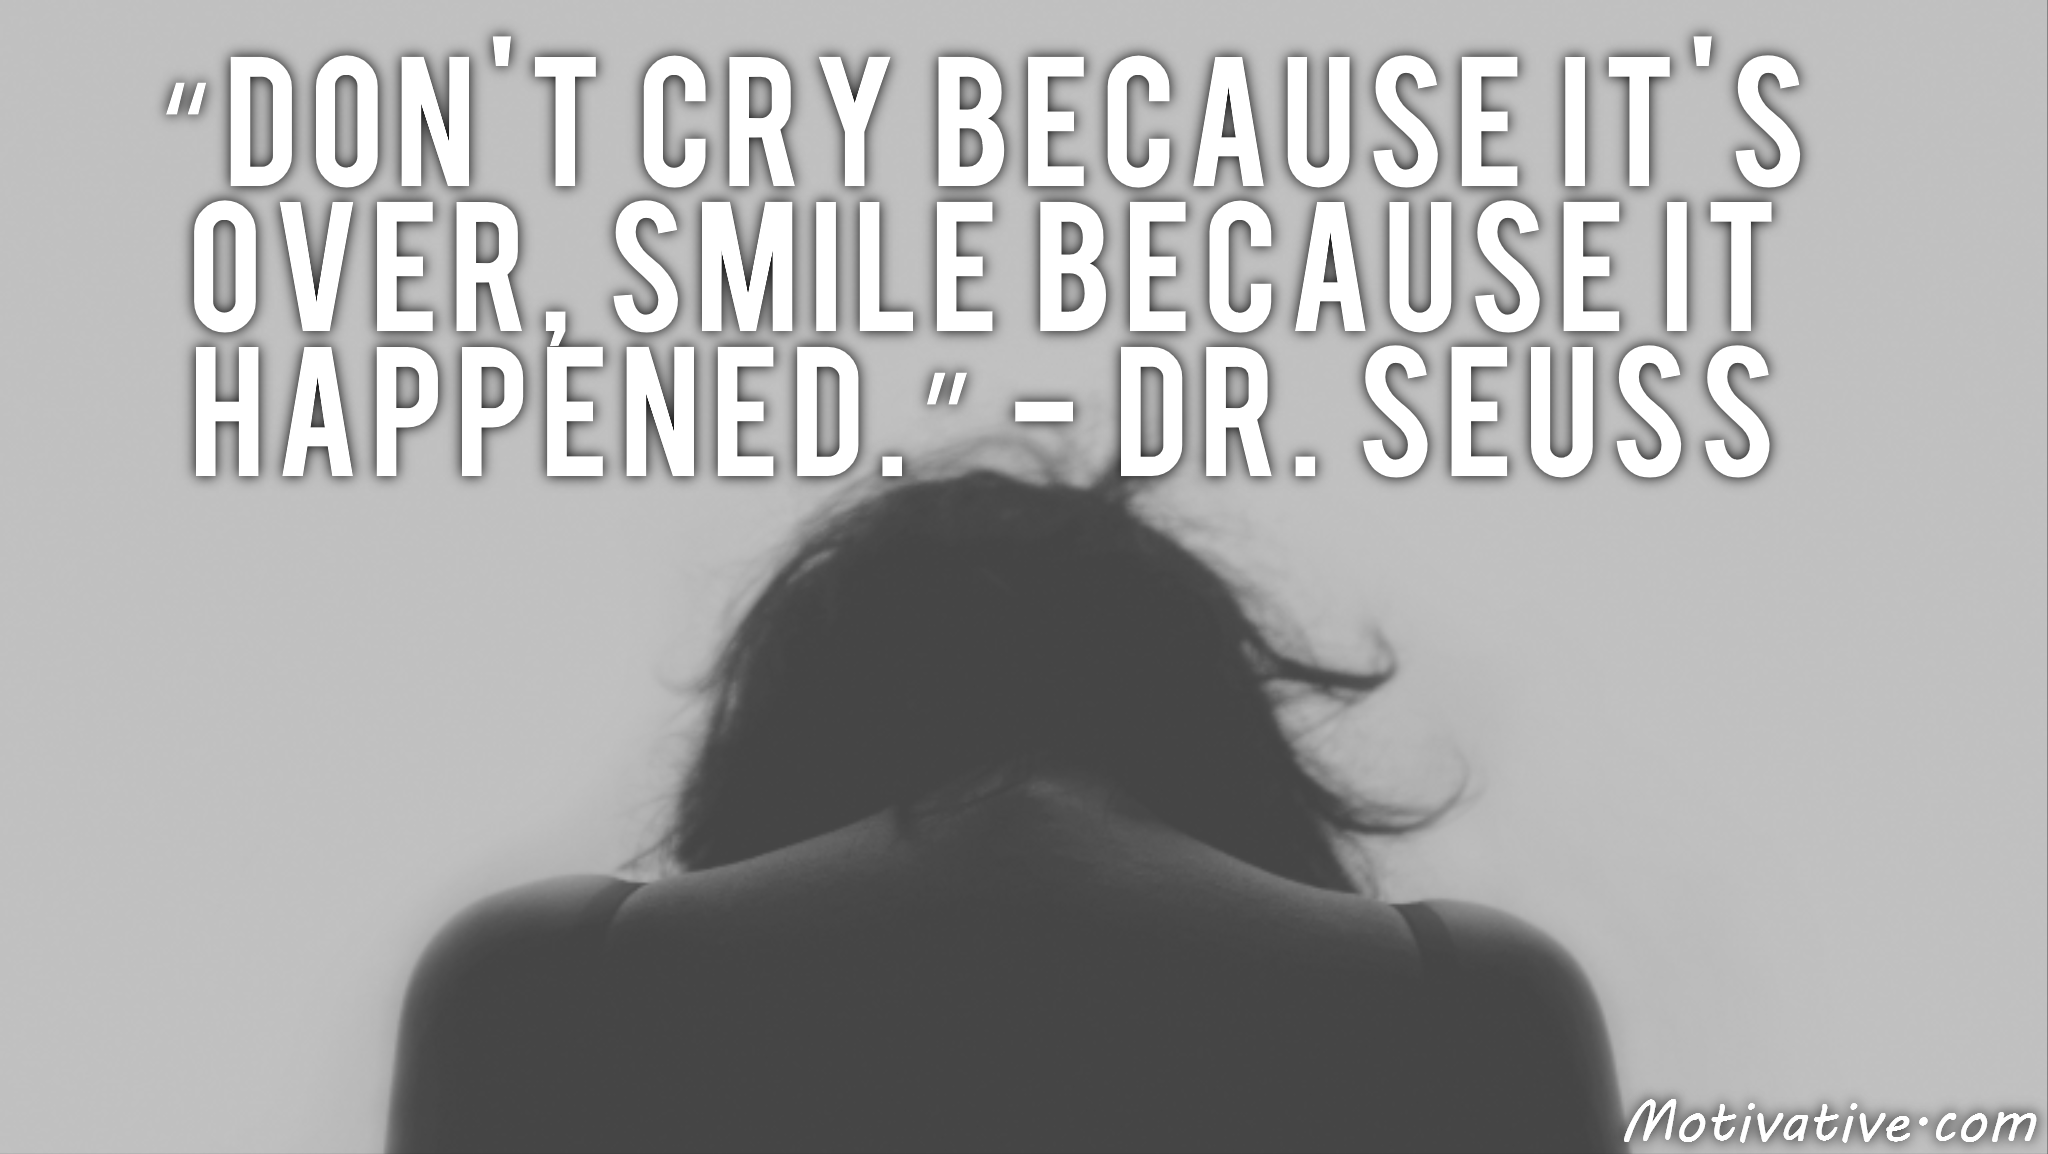 Don’t cry because it’s over, smile because it happened. – Dr. Seuss